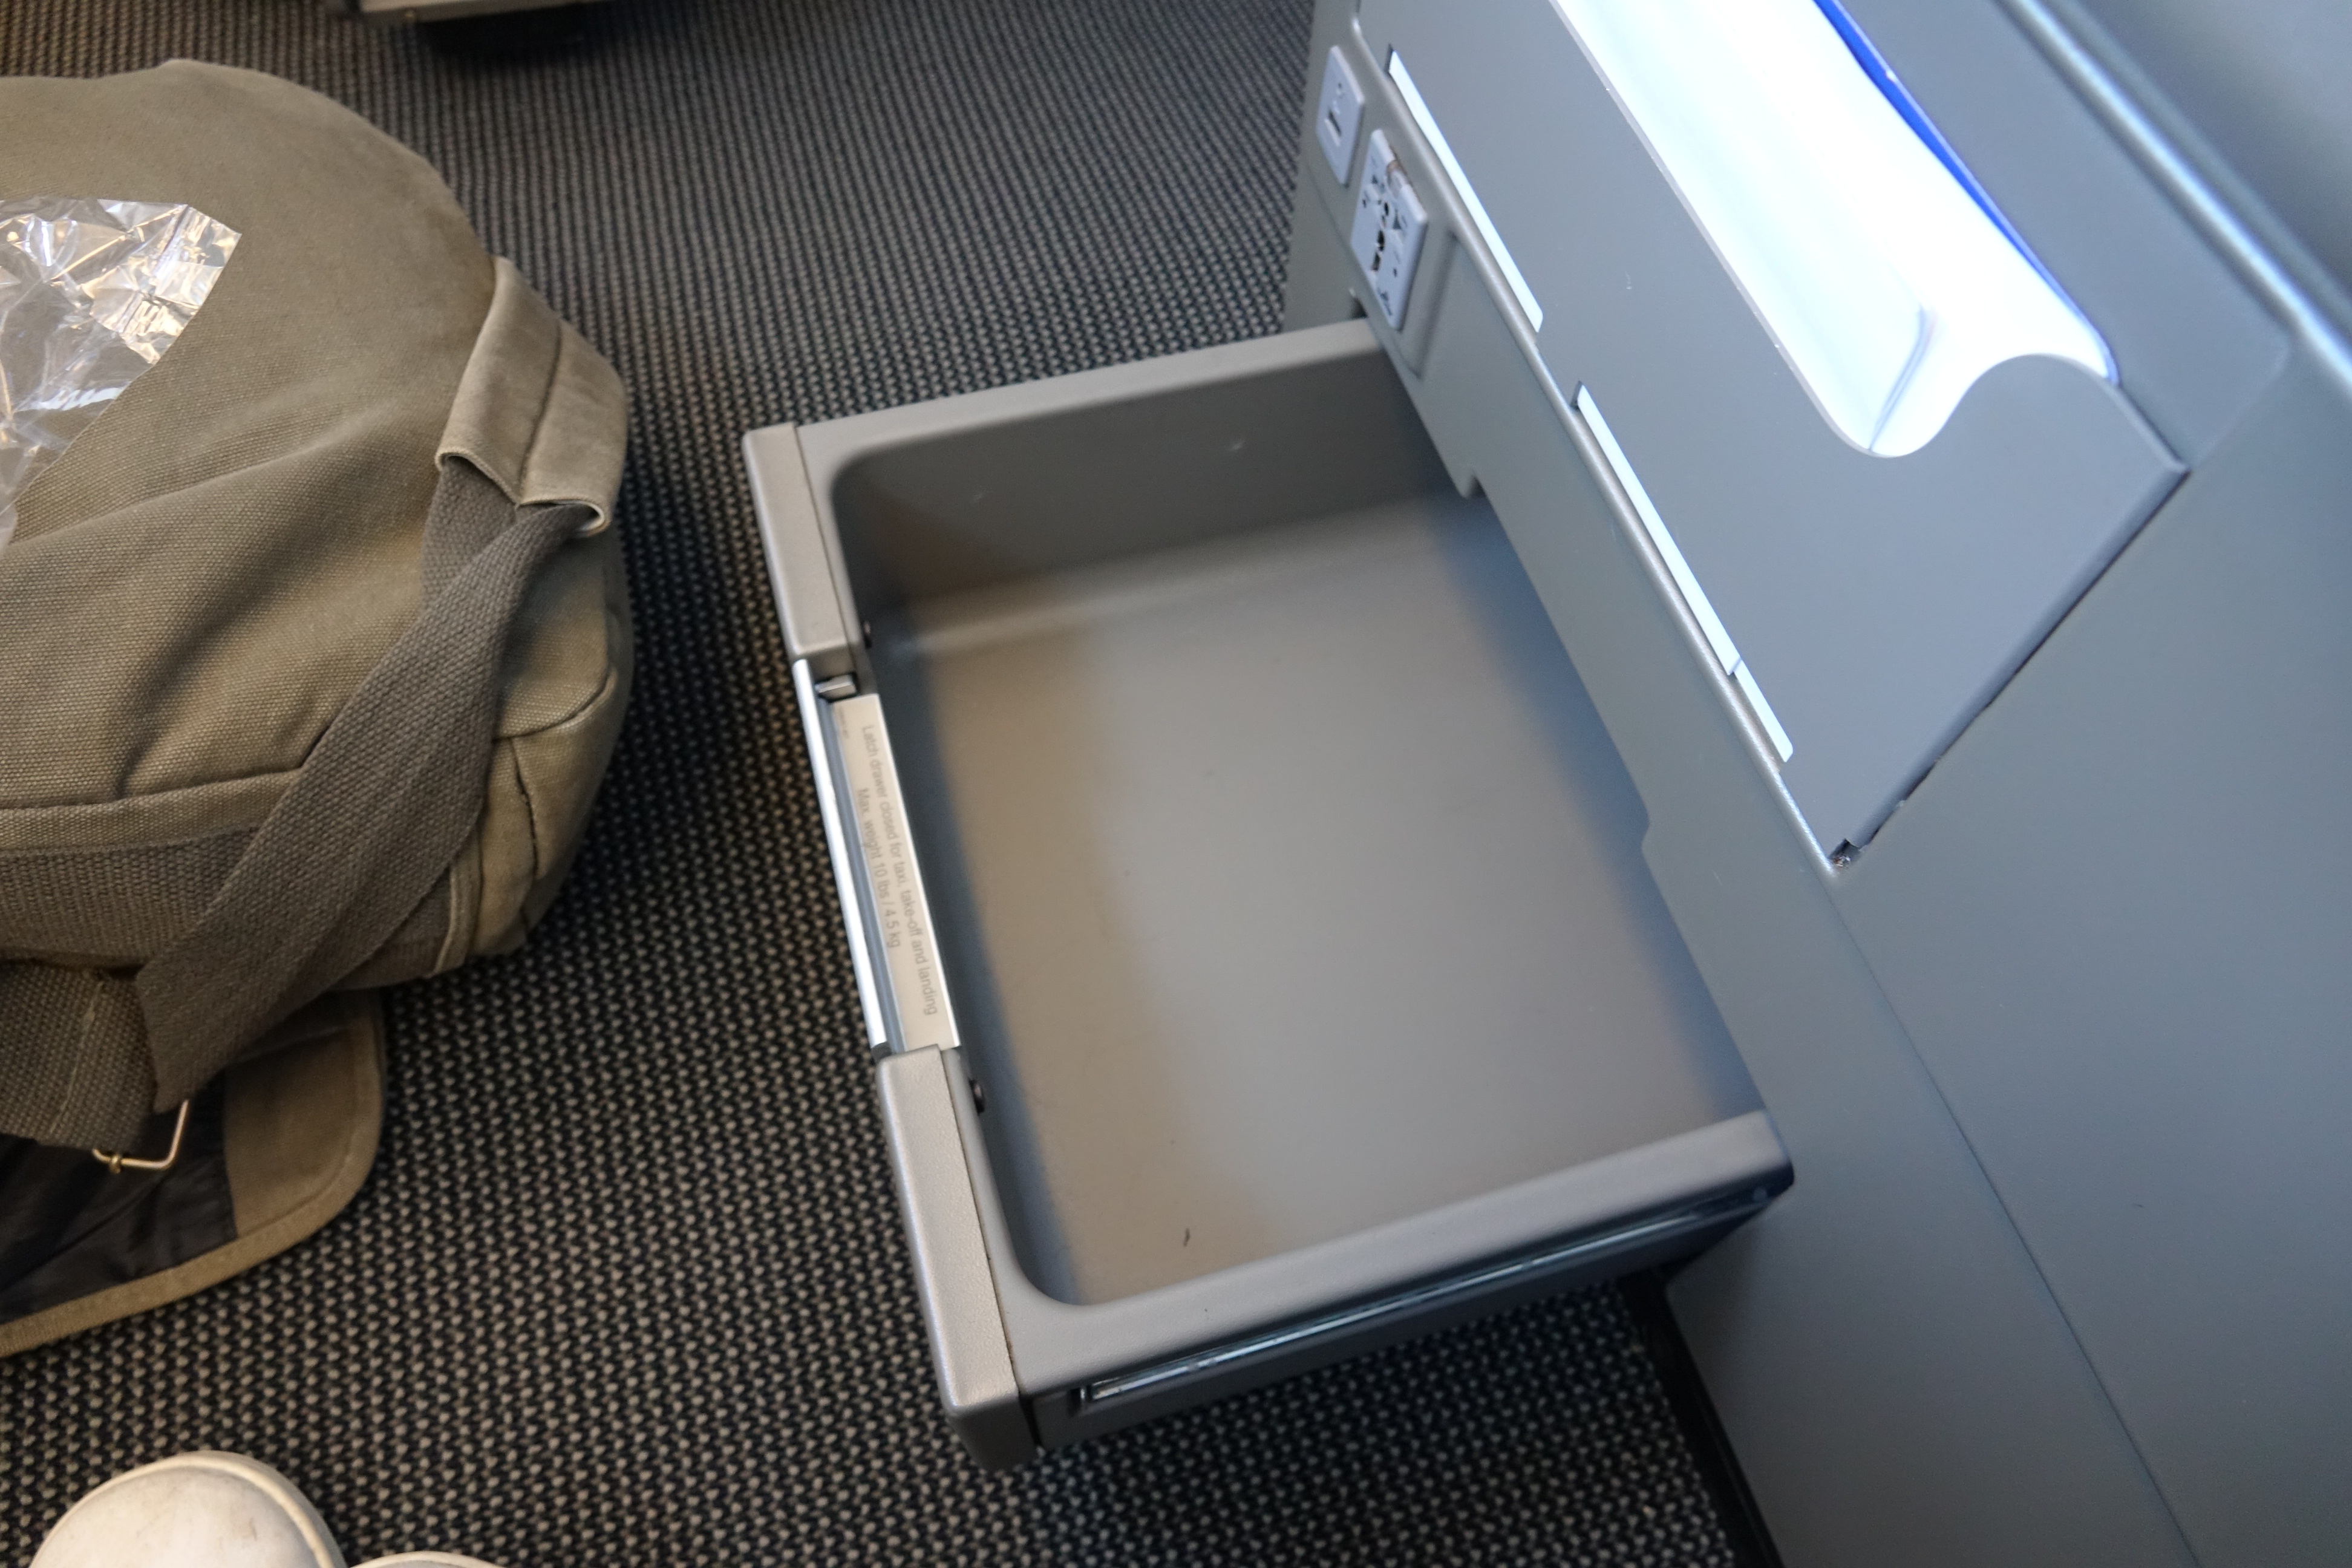 an empty drawer in an airplane